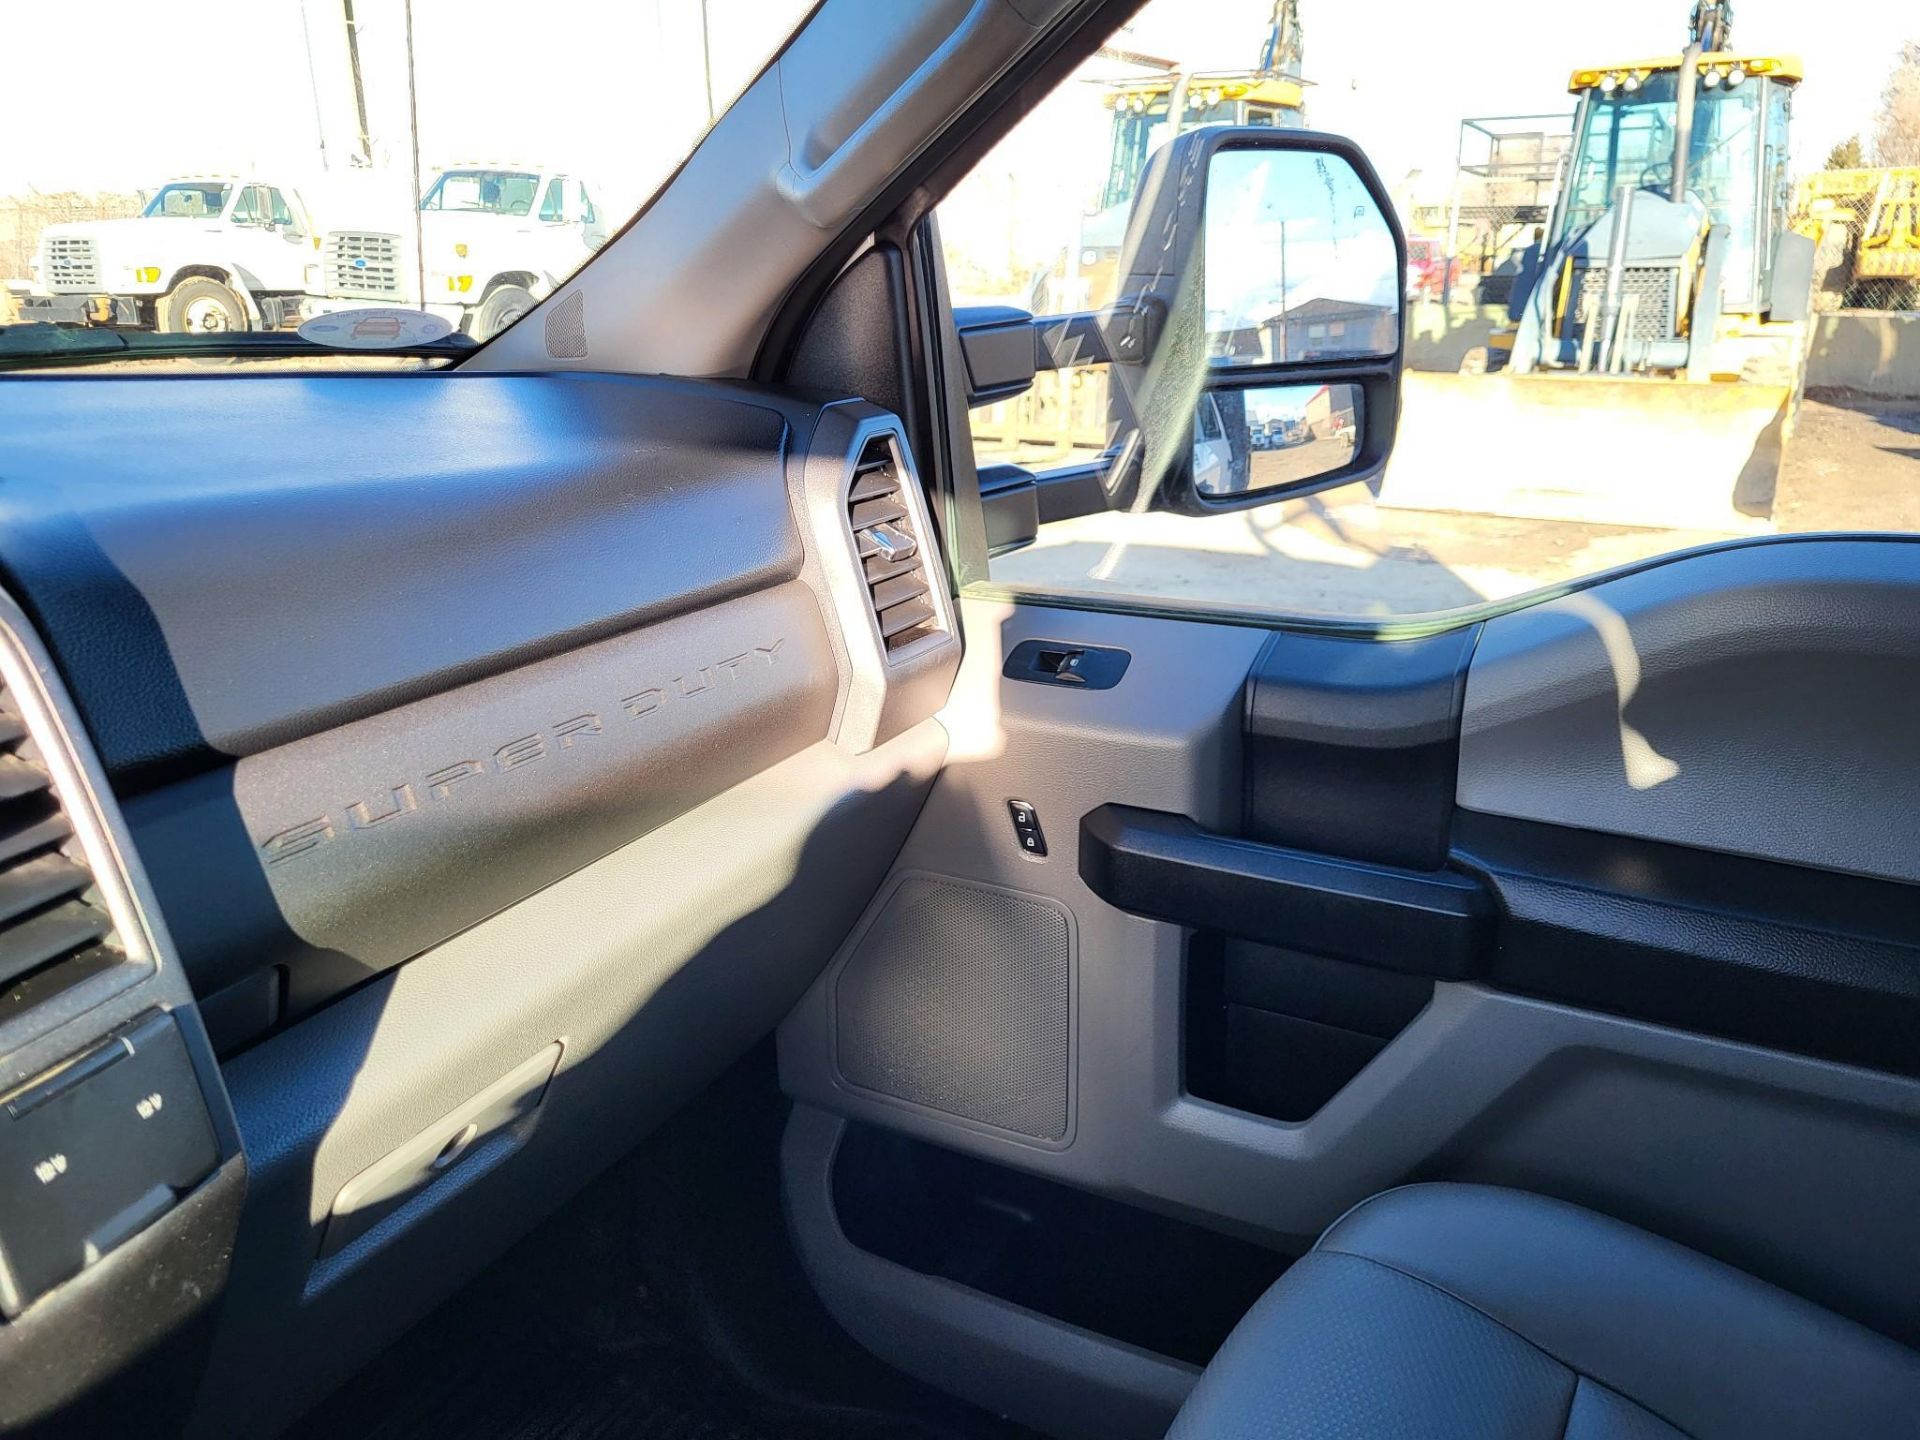 2019 FORD F550 CREW CAB DIESEL DUALLY DUMP TRUCK 31,872 MILES - Image 26 of 34